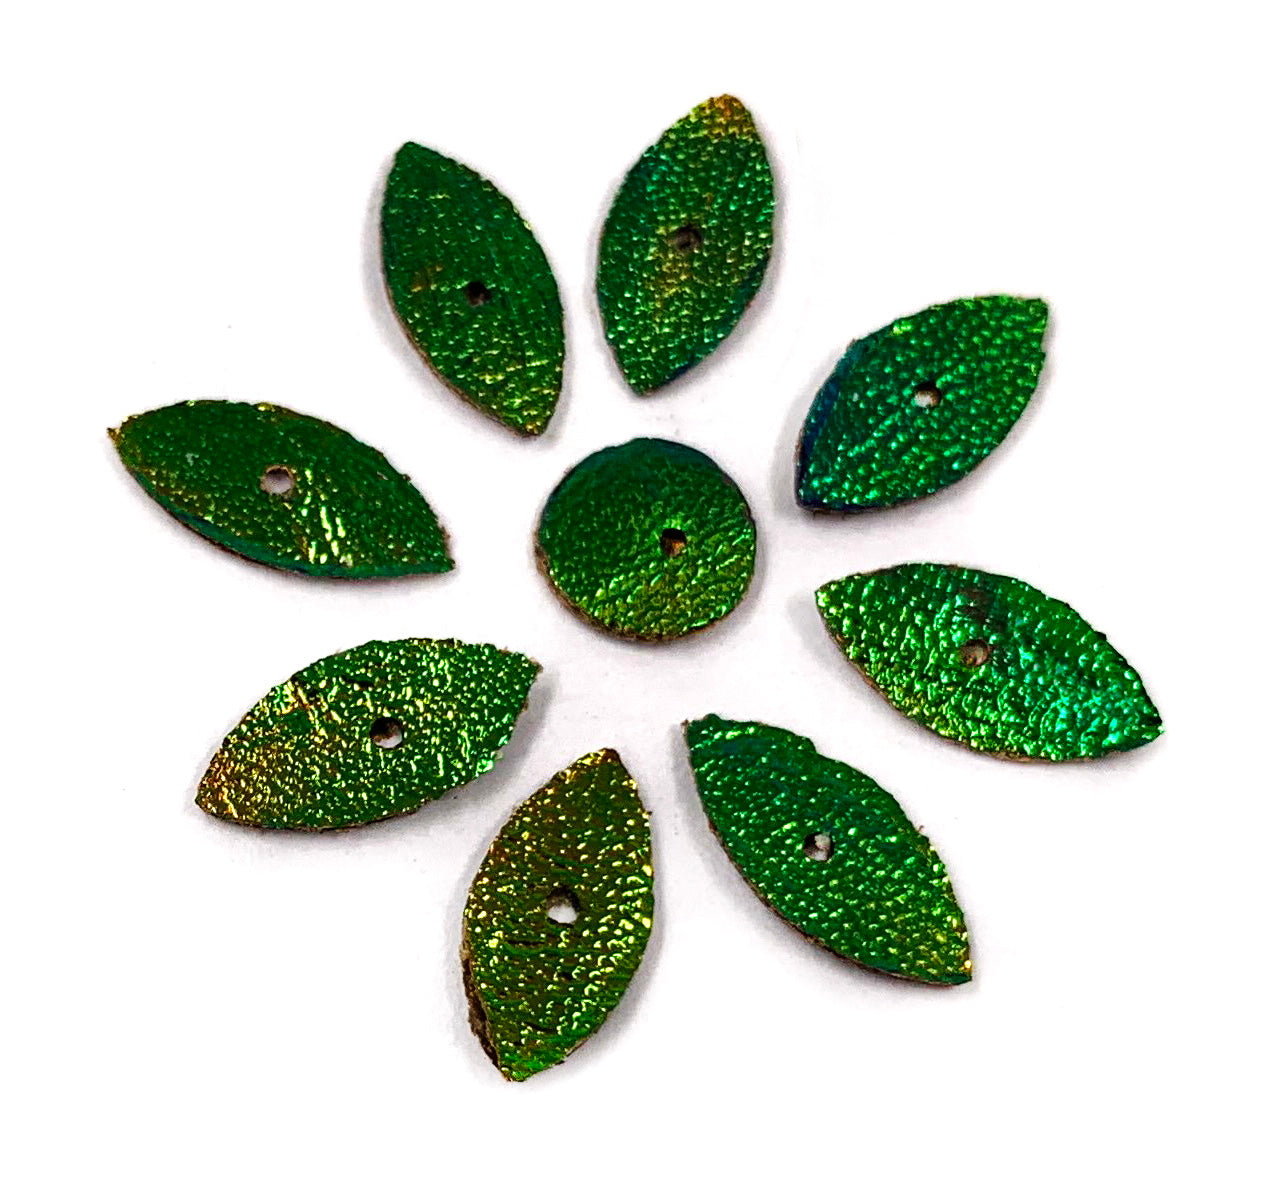 Jewel Beetle Wings DRILLED with HOLE 100 Pcs Natural Wings - Rice Grain Marquise 1 CM x 0.5 CM